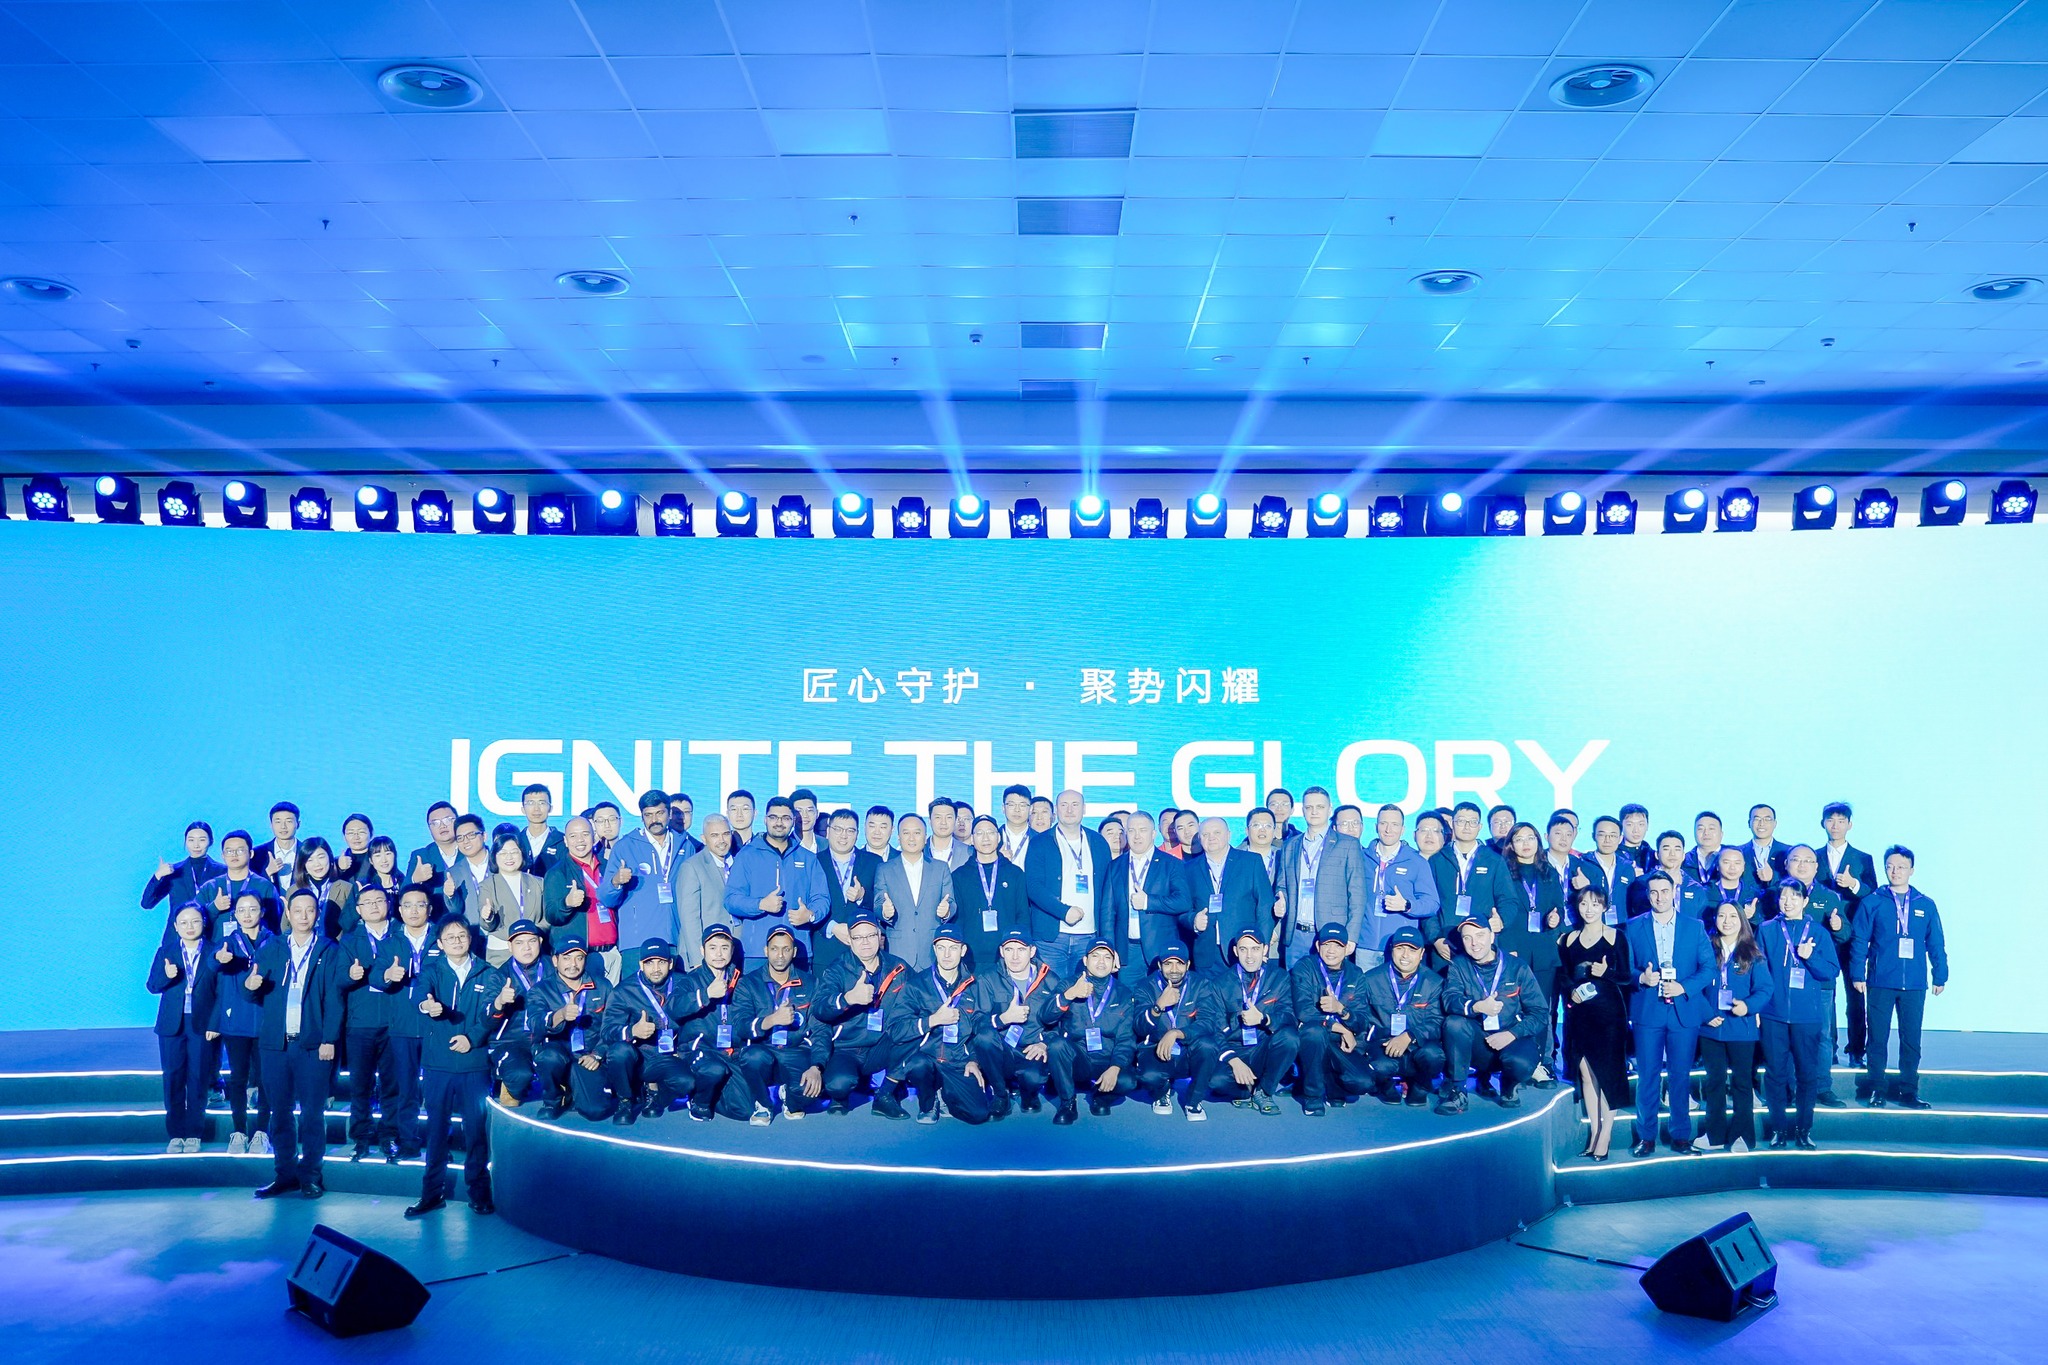 Geely Global Service Skills Competition Stage